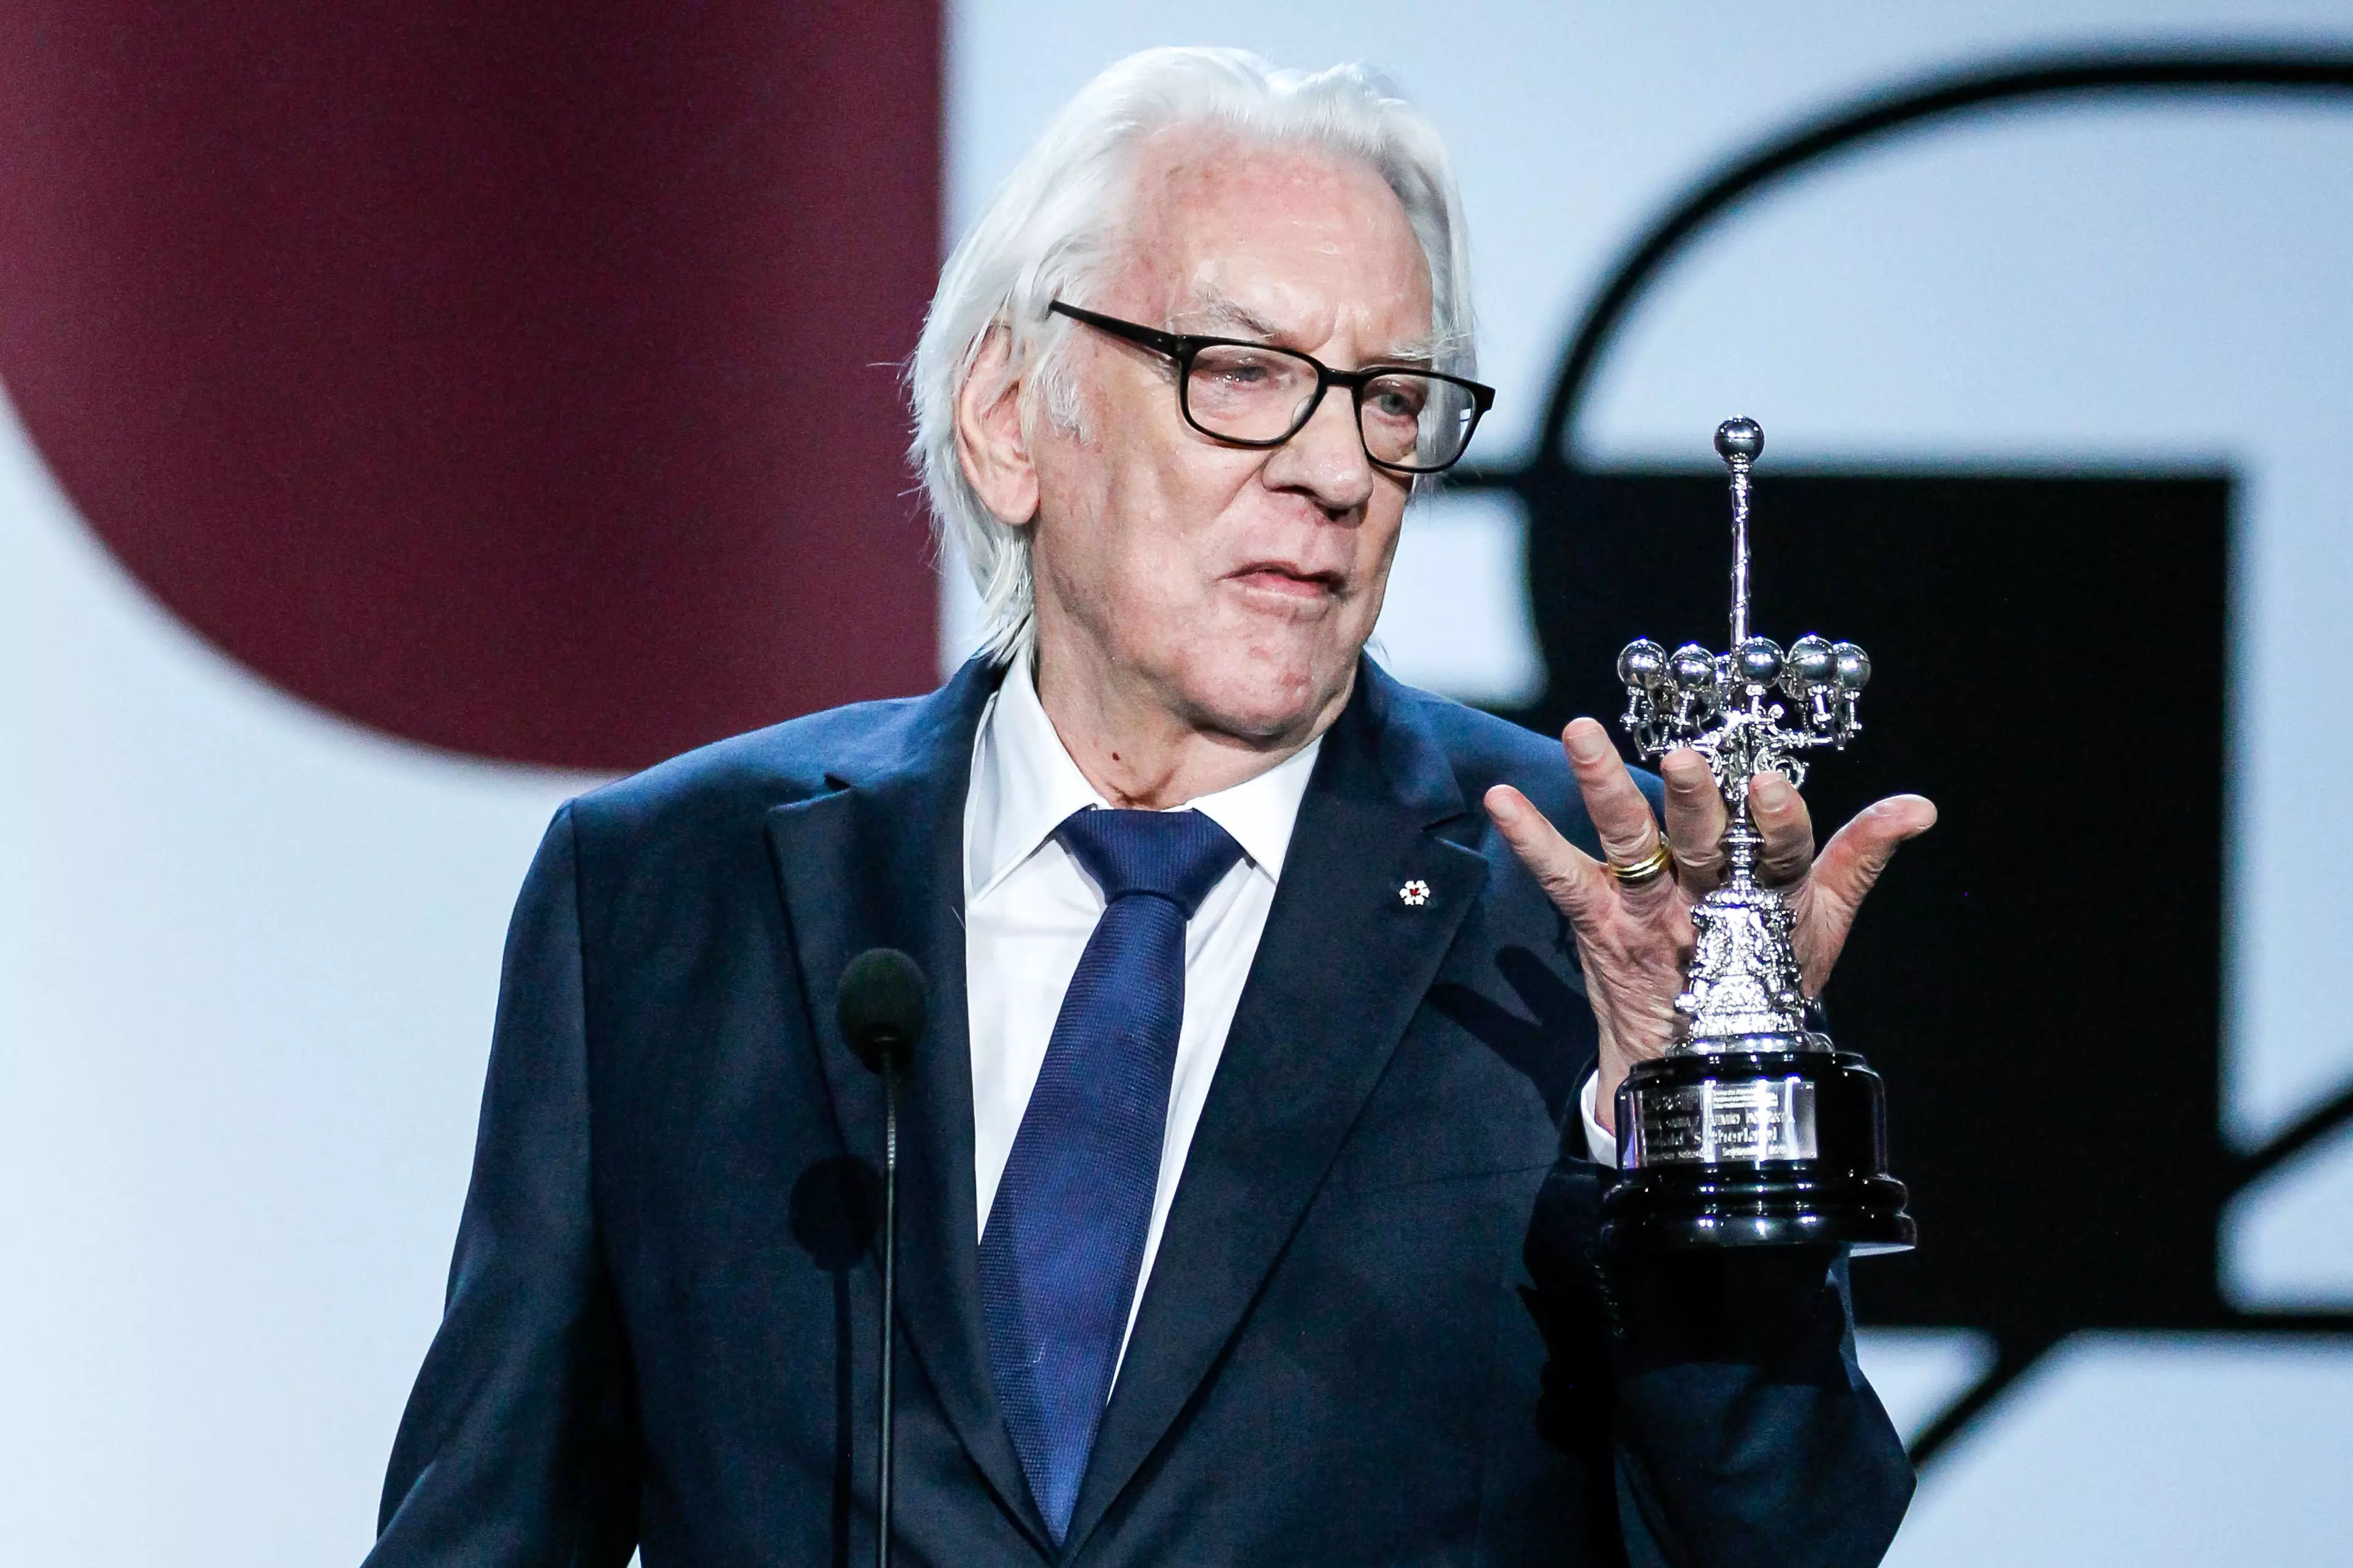 Donald Sutherland receiving the award back in 2019.